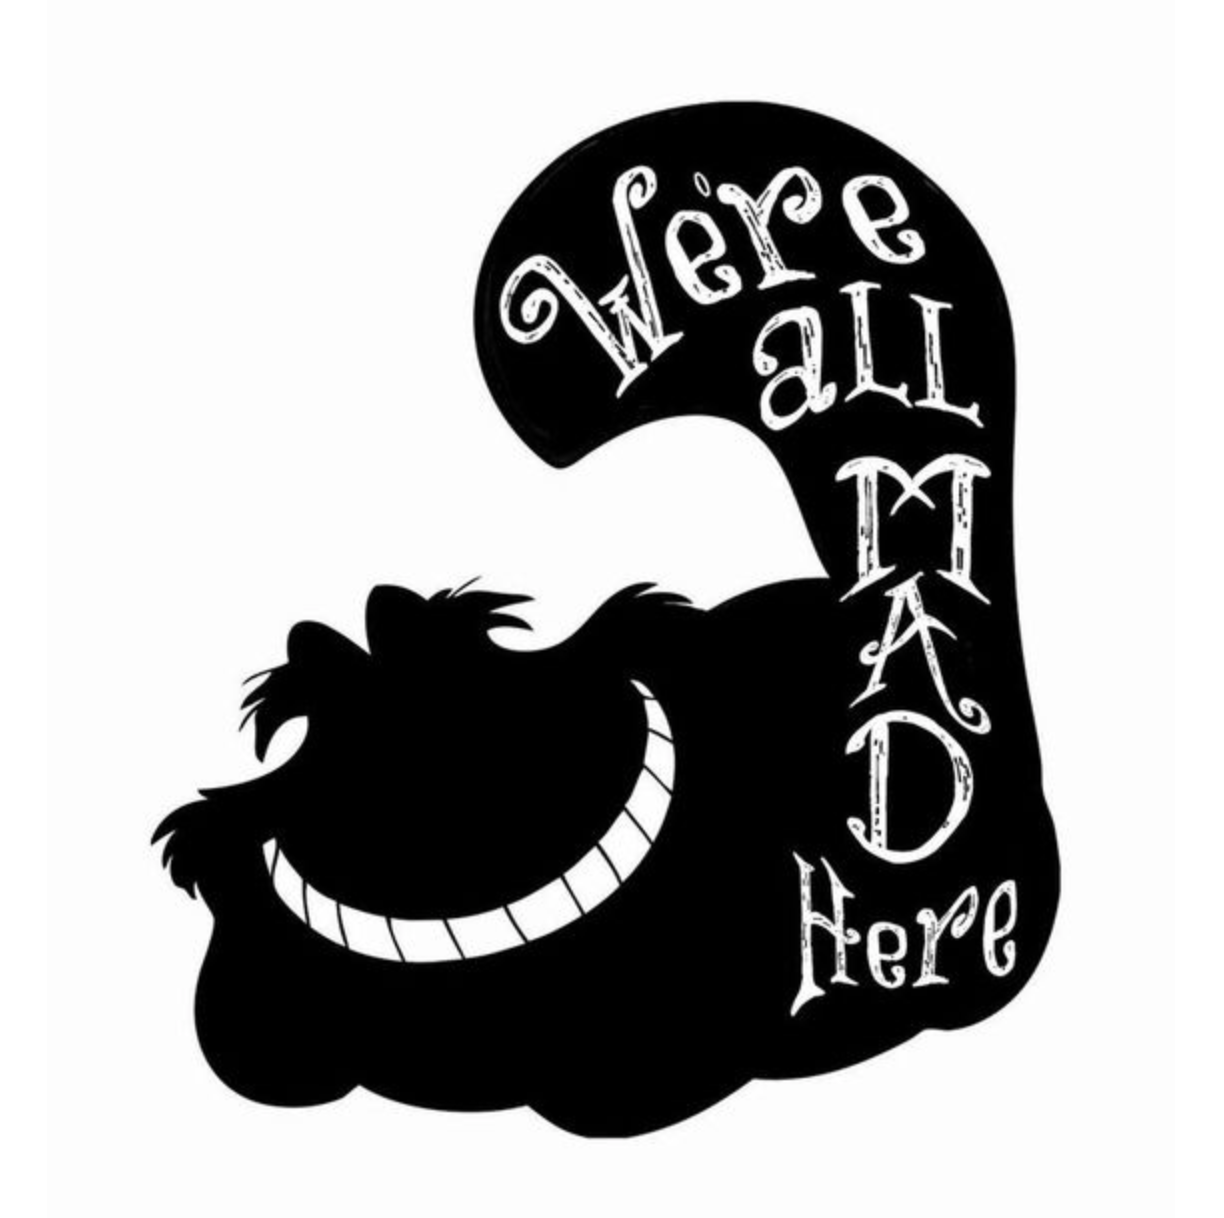 cheshire cat image with text on it